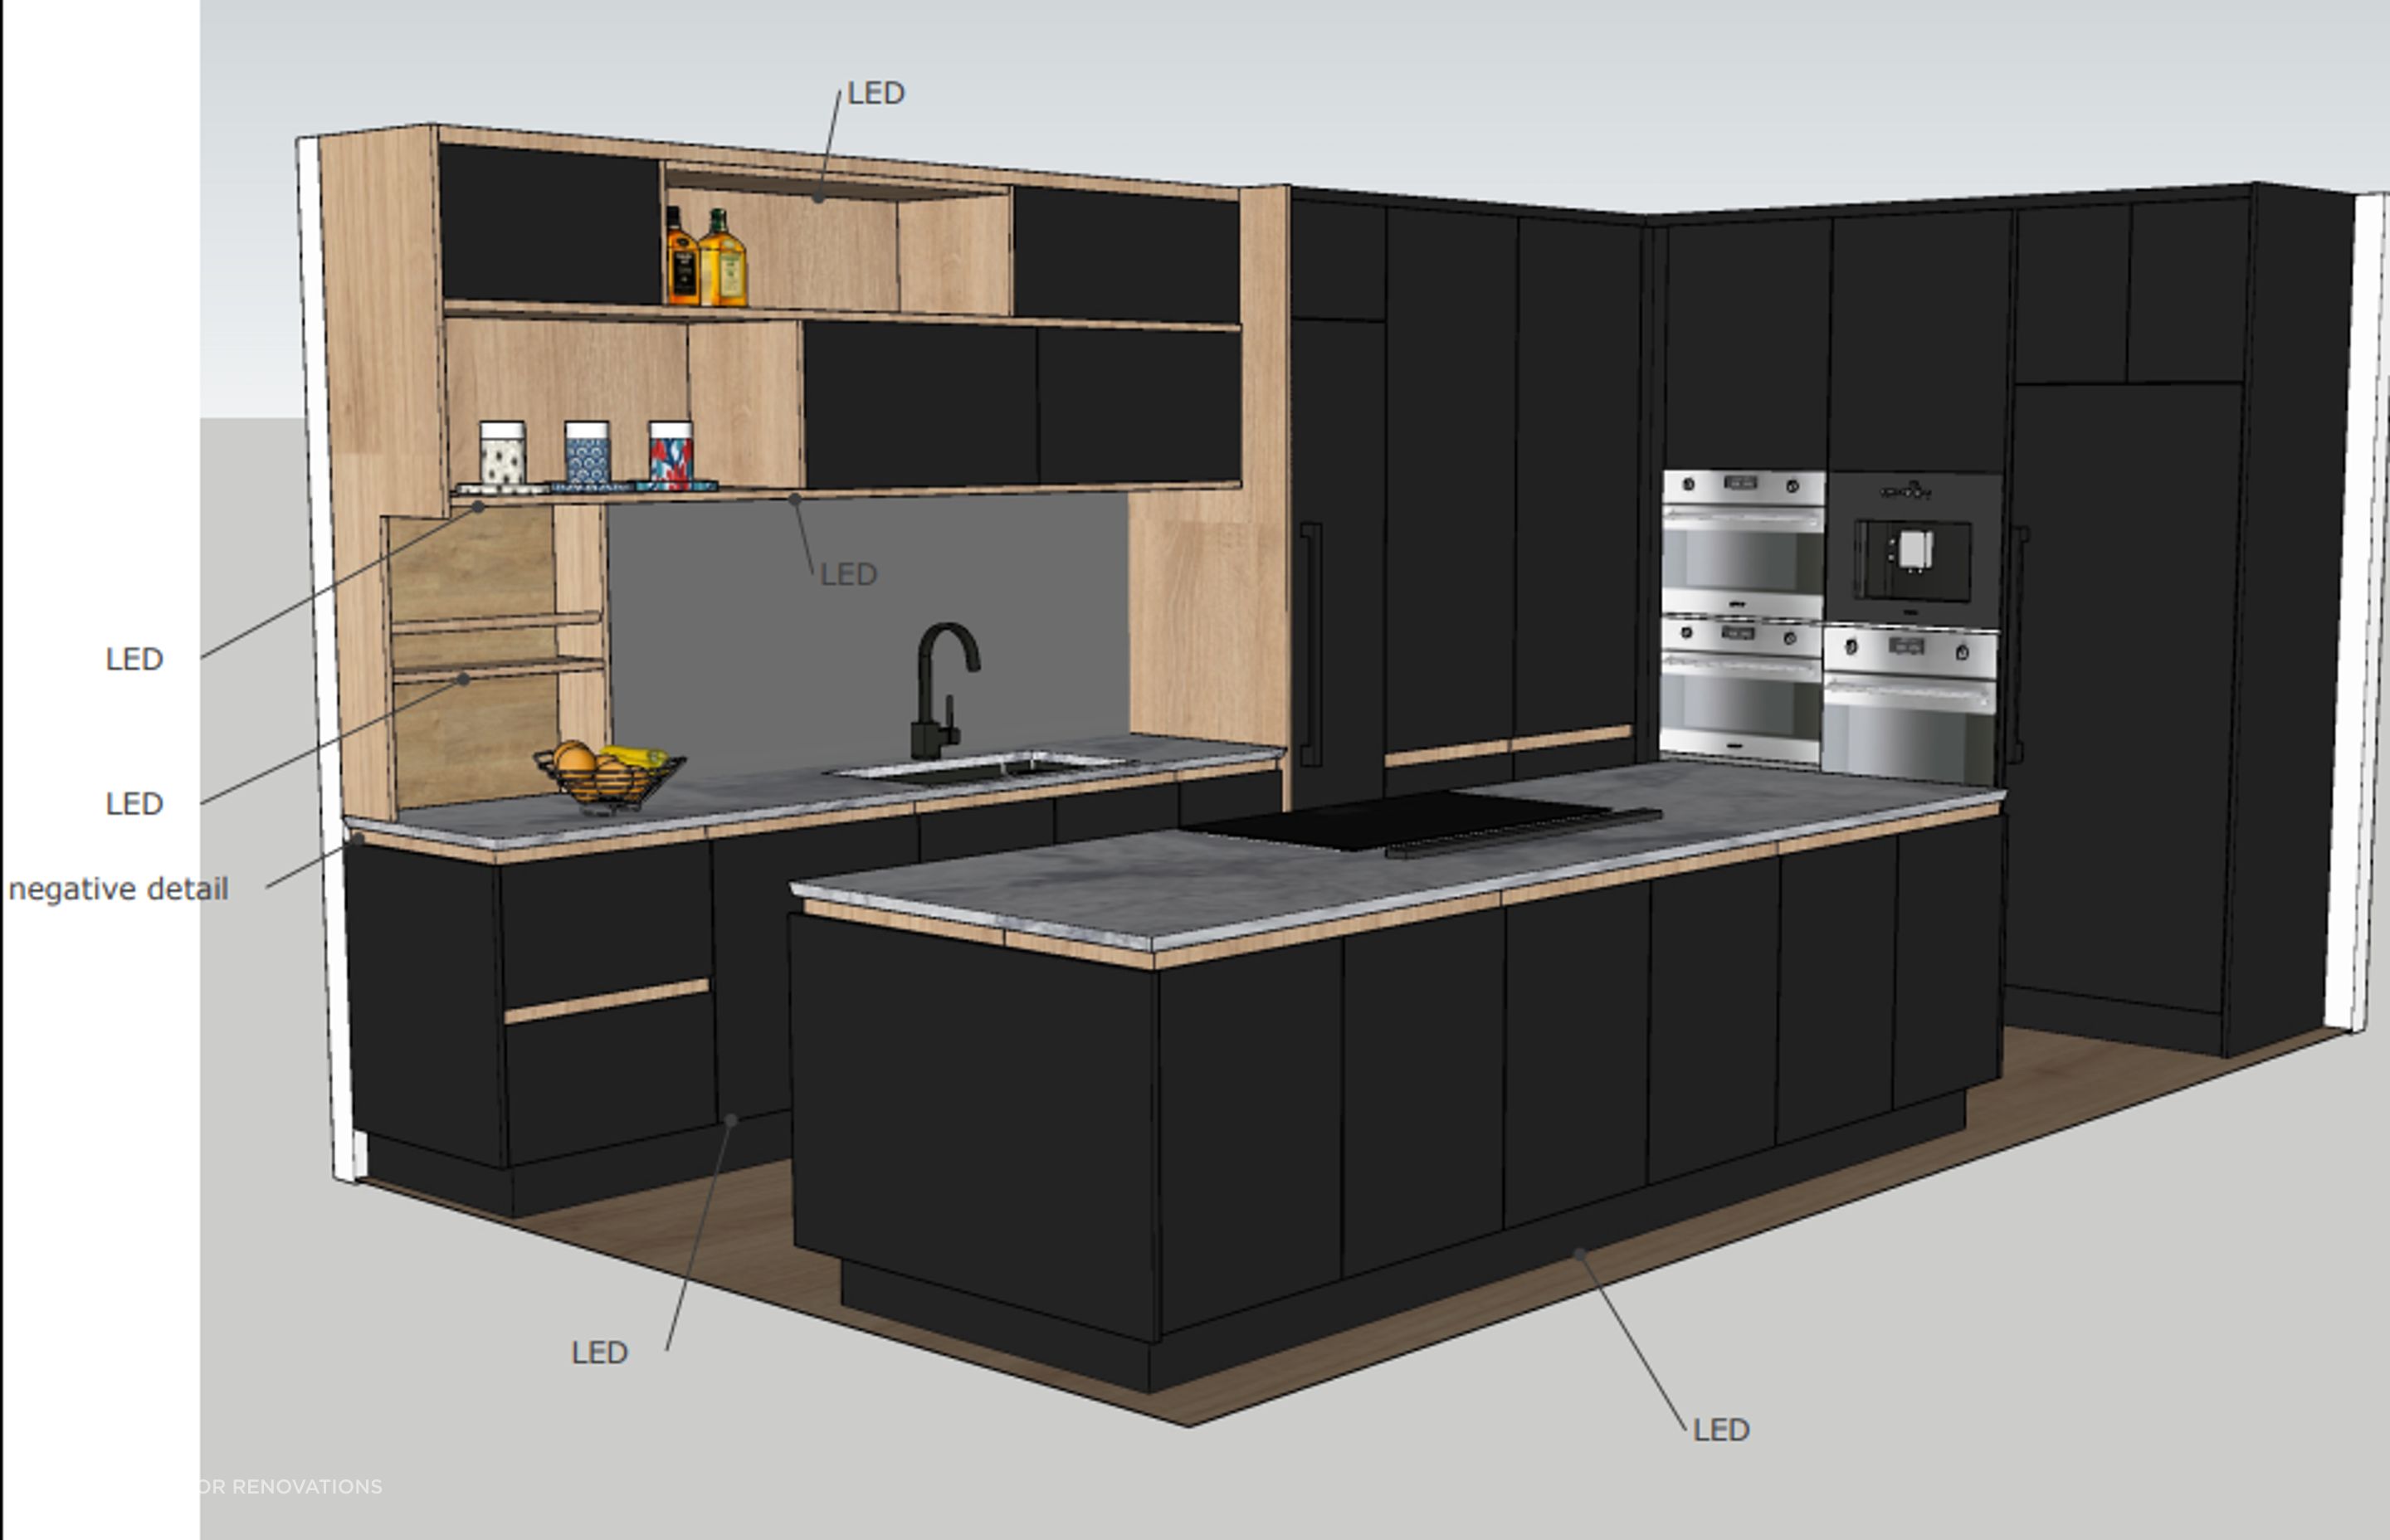 3 KITCHEN DISPLAYS EXPLAINED IN OUR KITCHEN SHOWROOM IN AUCKLAND – KITCHEN DESIGNS + MATERIALS